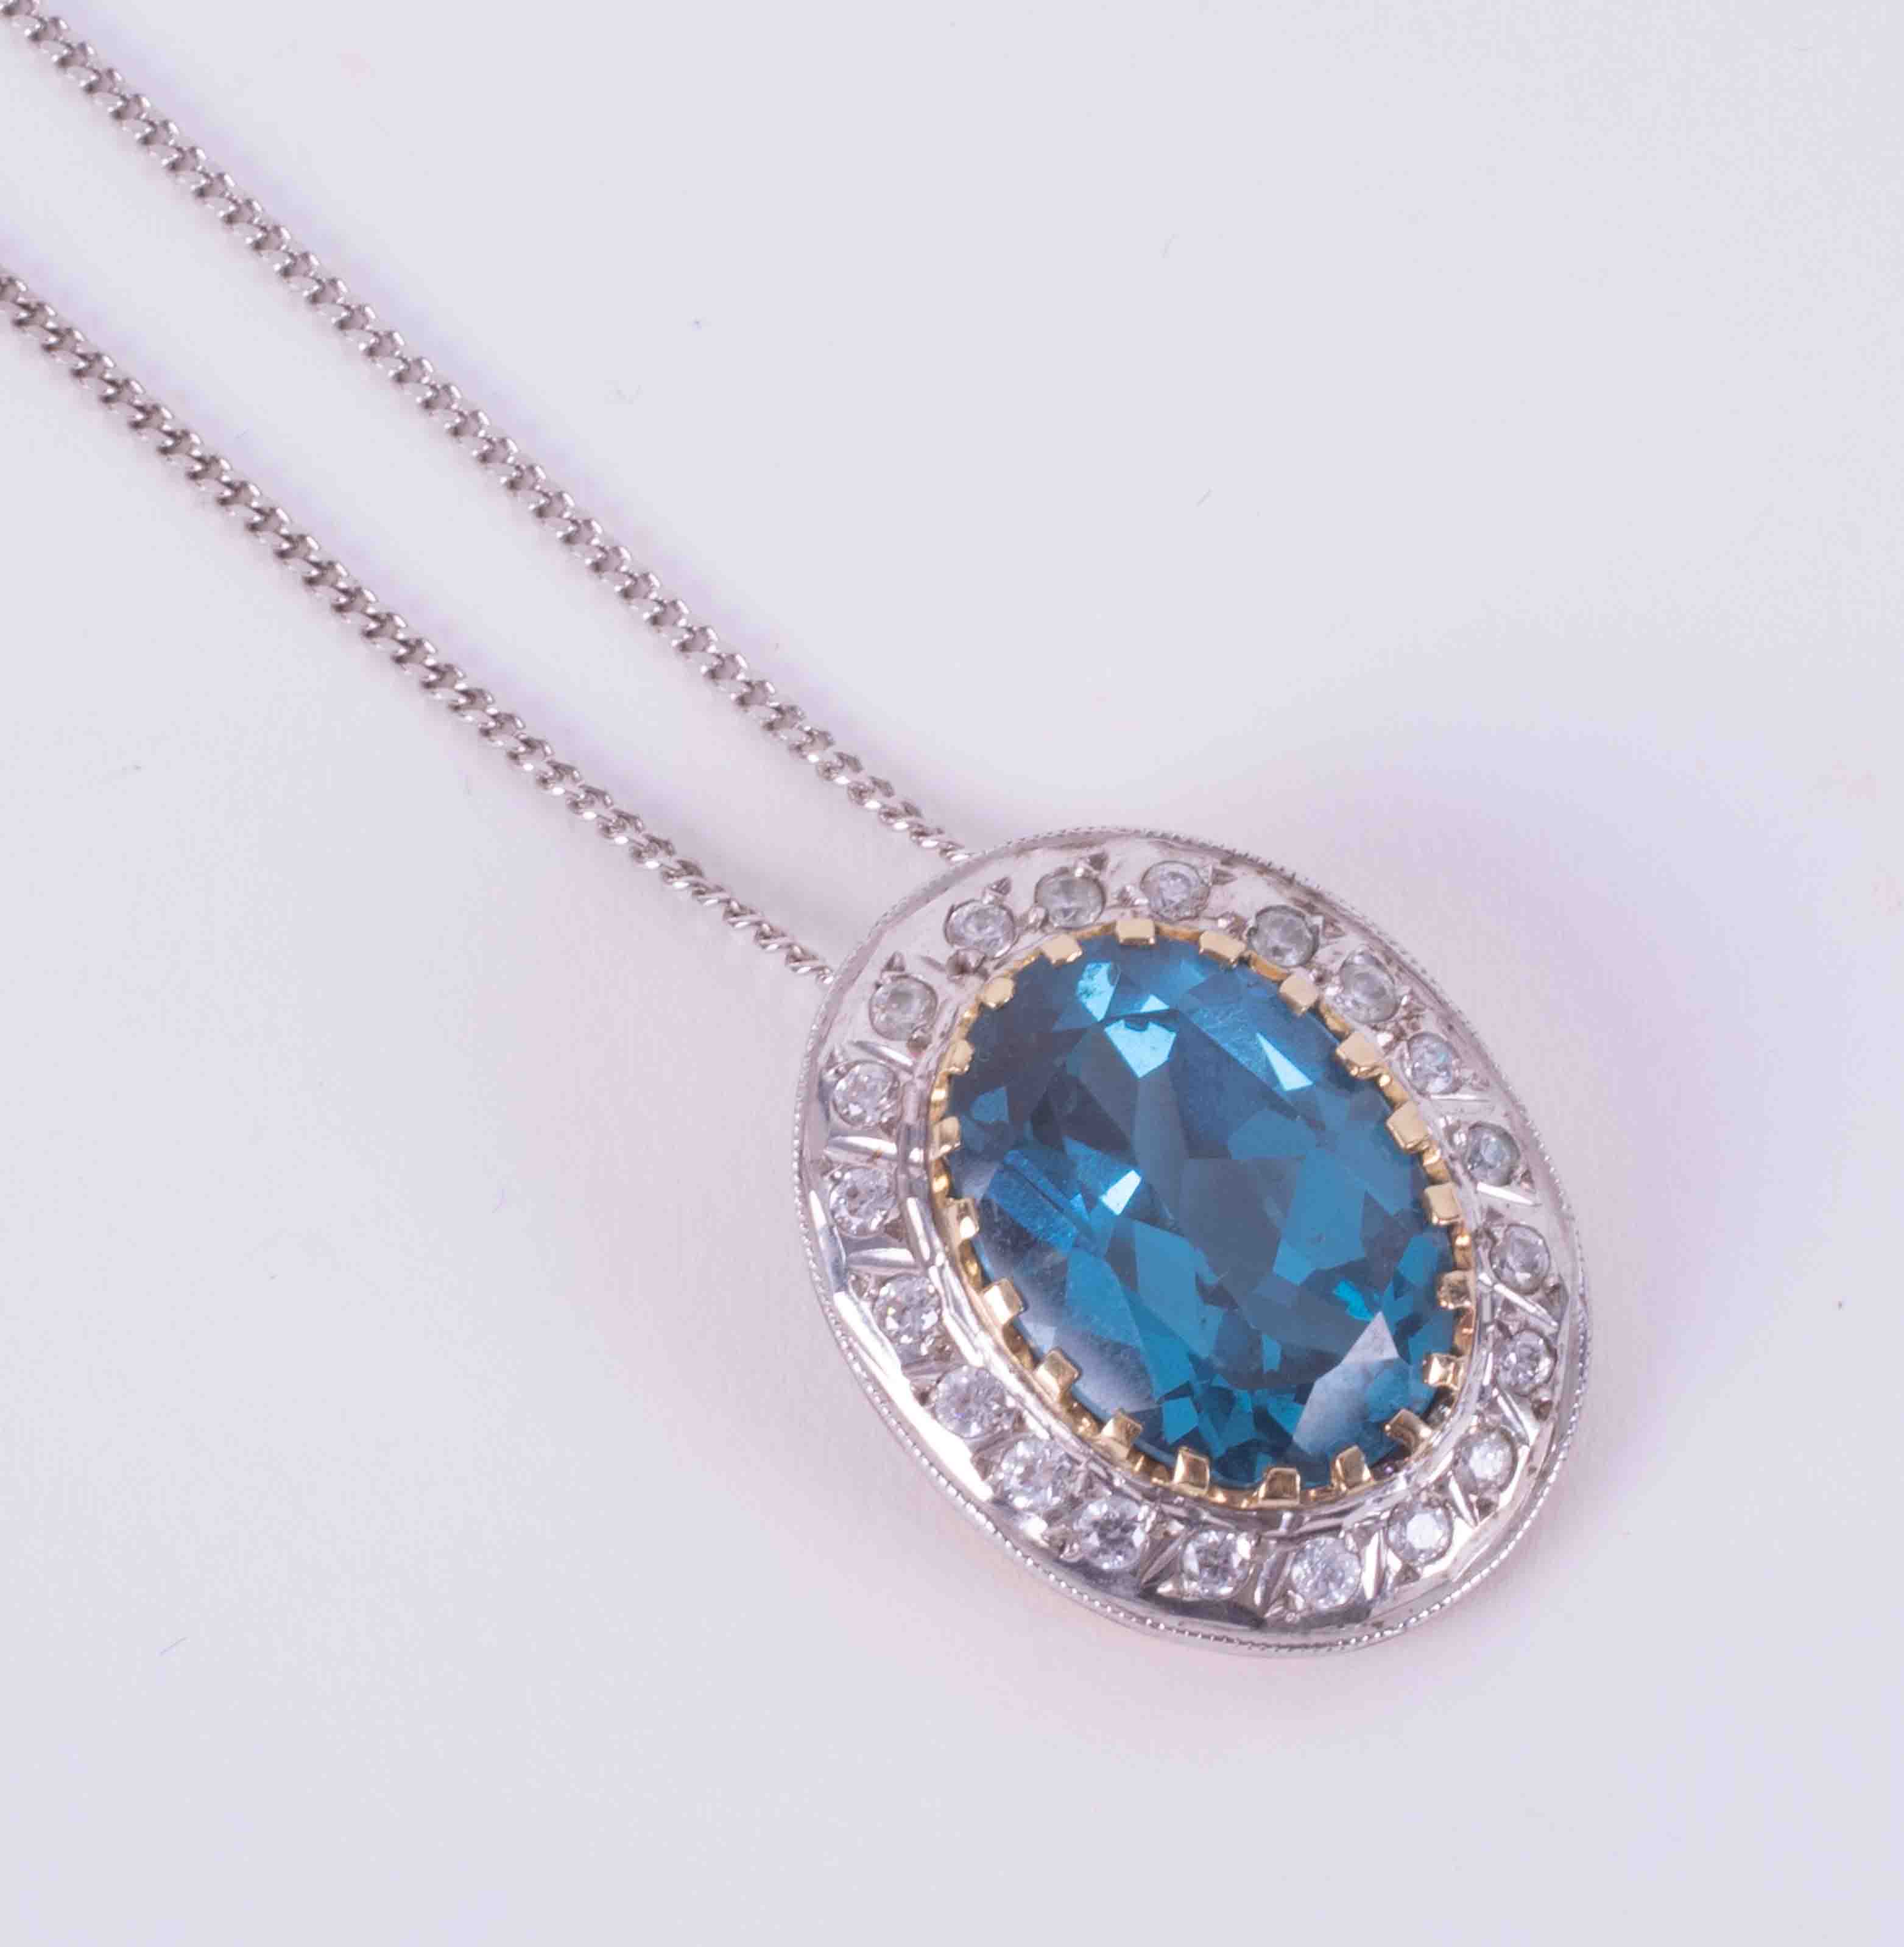 A 9ct white gold 18" curb chain with a 14ct yellow & white gold pendant set with paste blue &